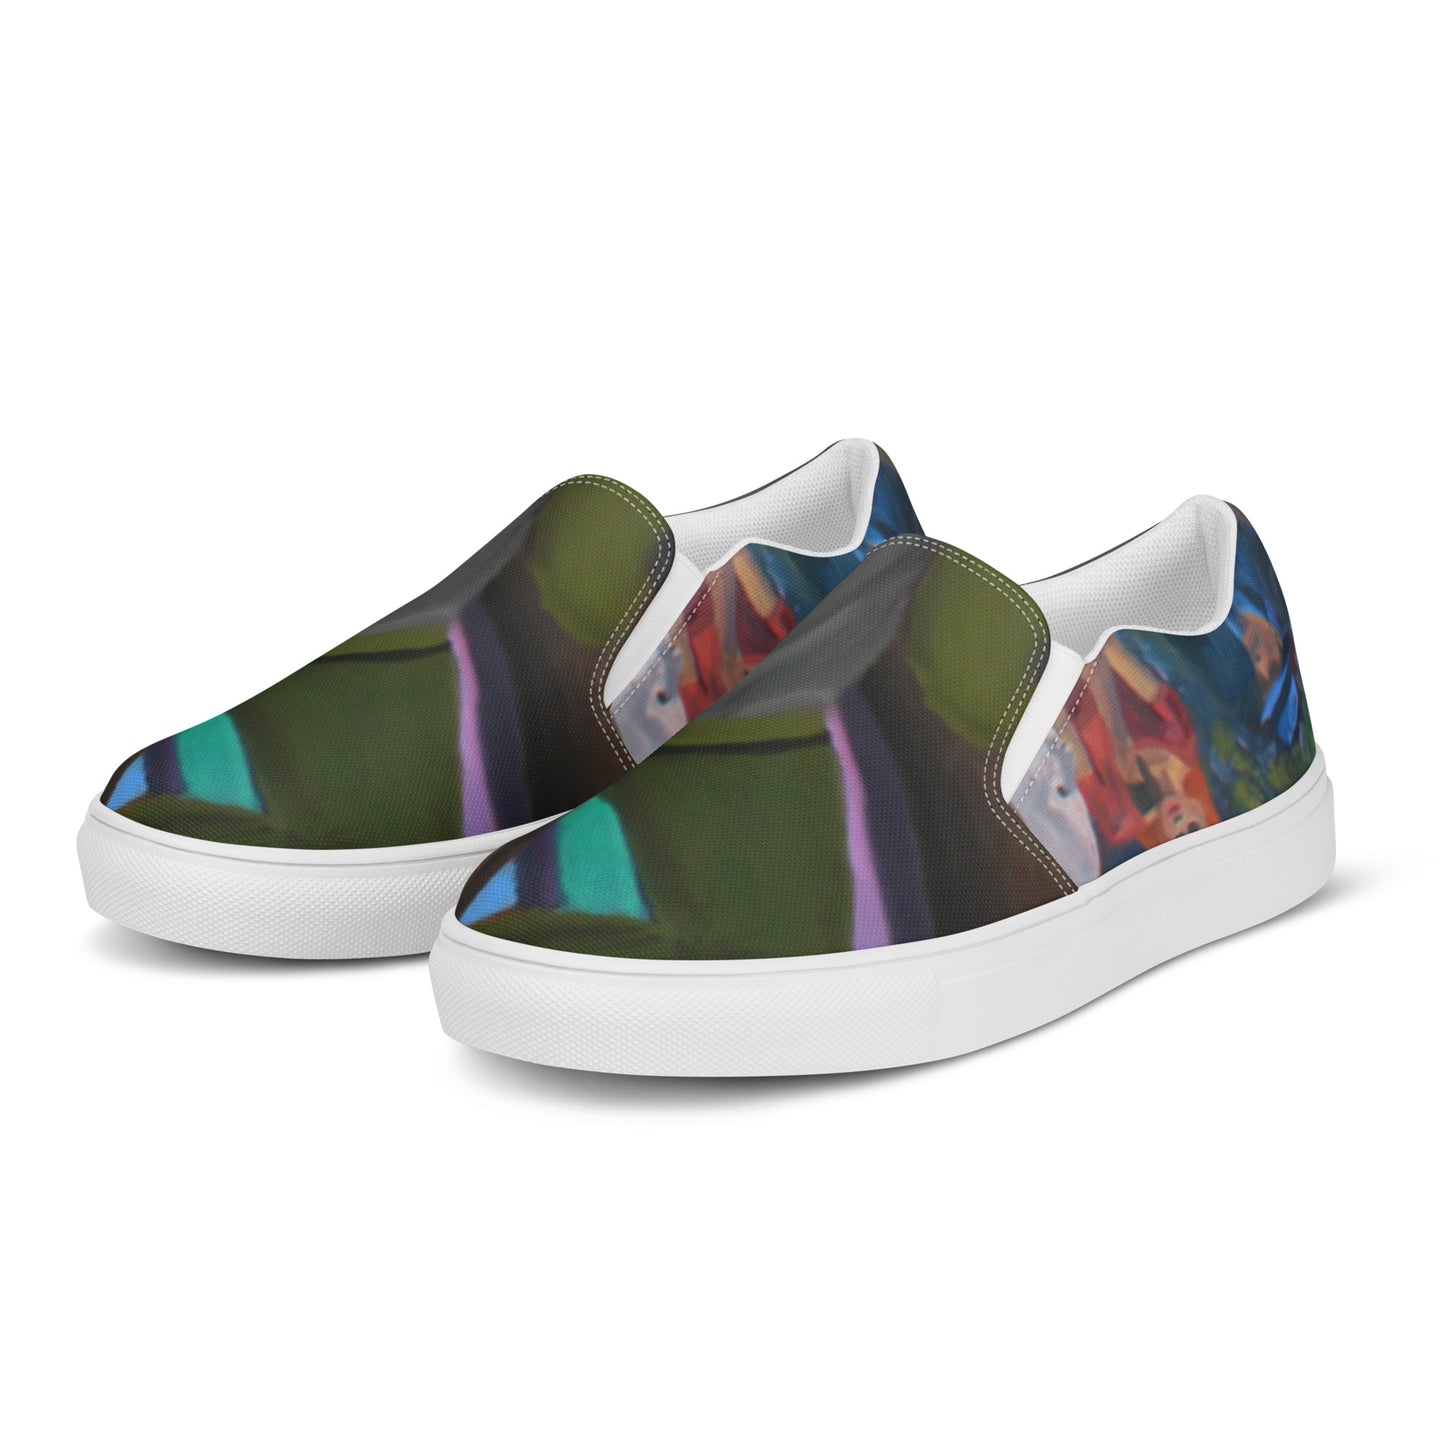 Year Year 2030 - Women’s slip-on canvas shoes